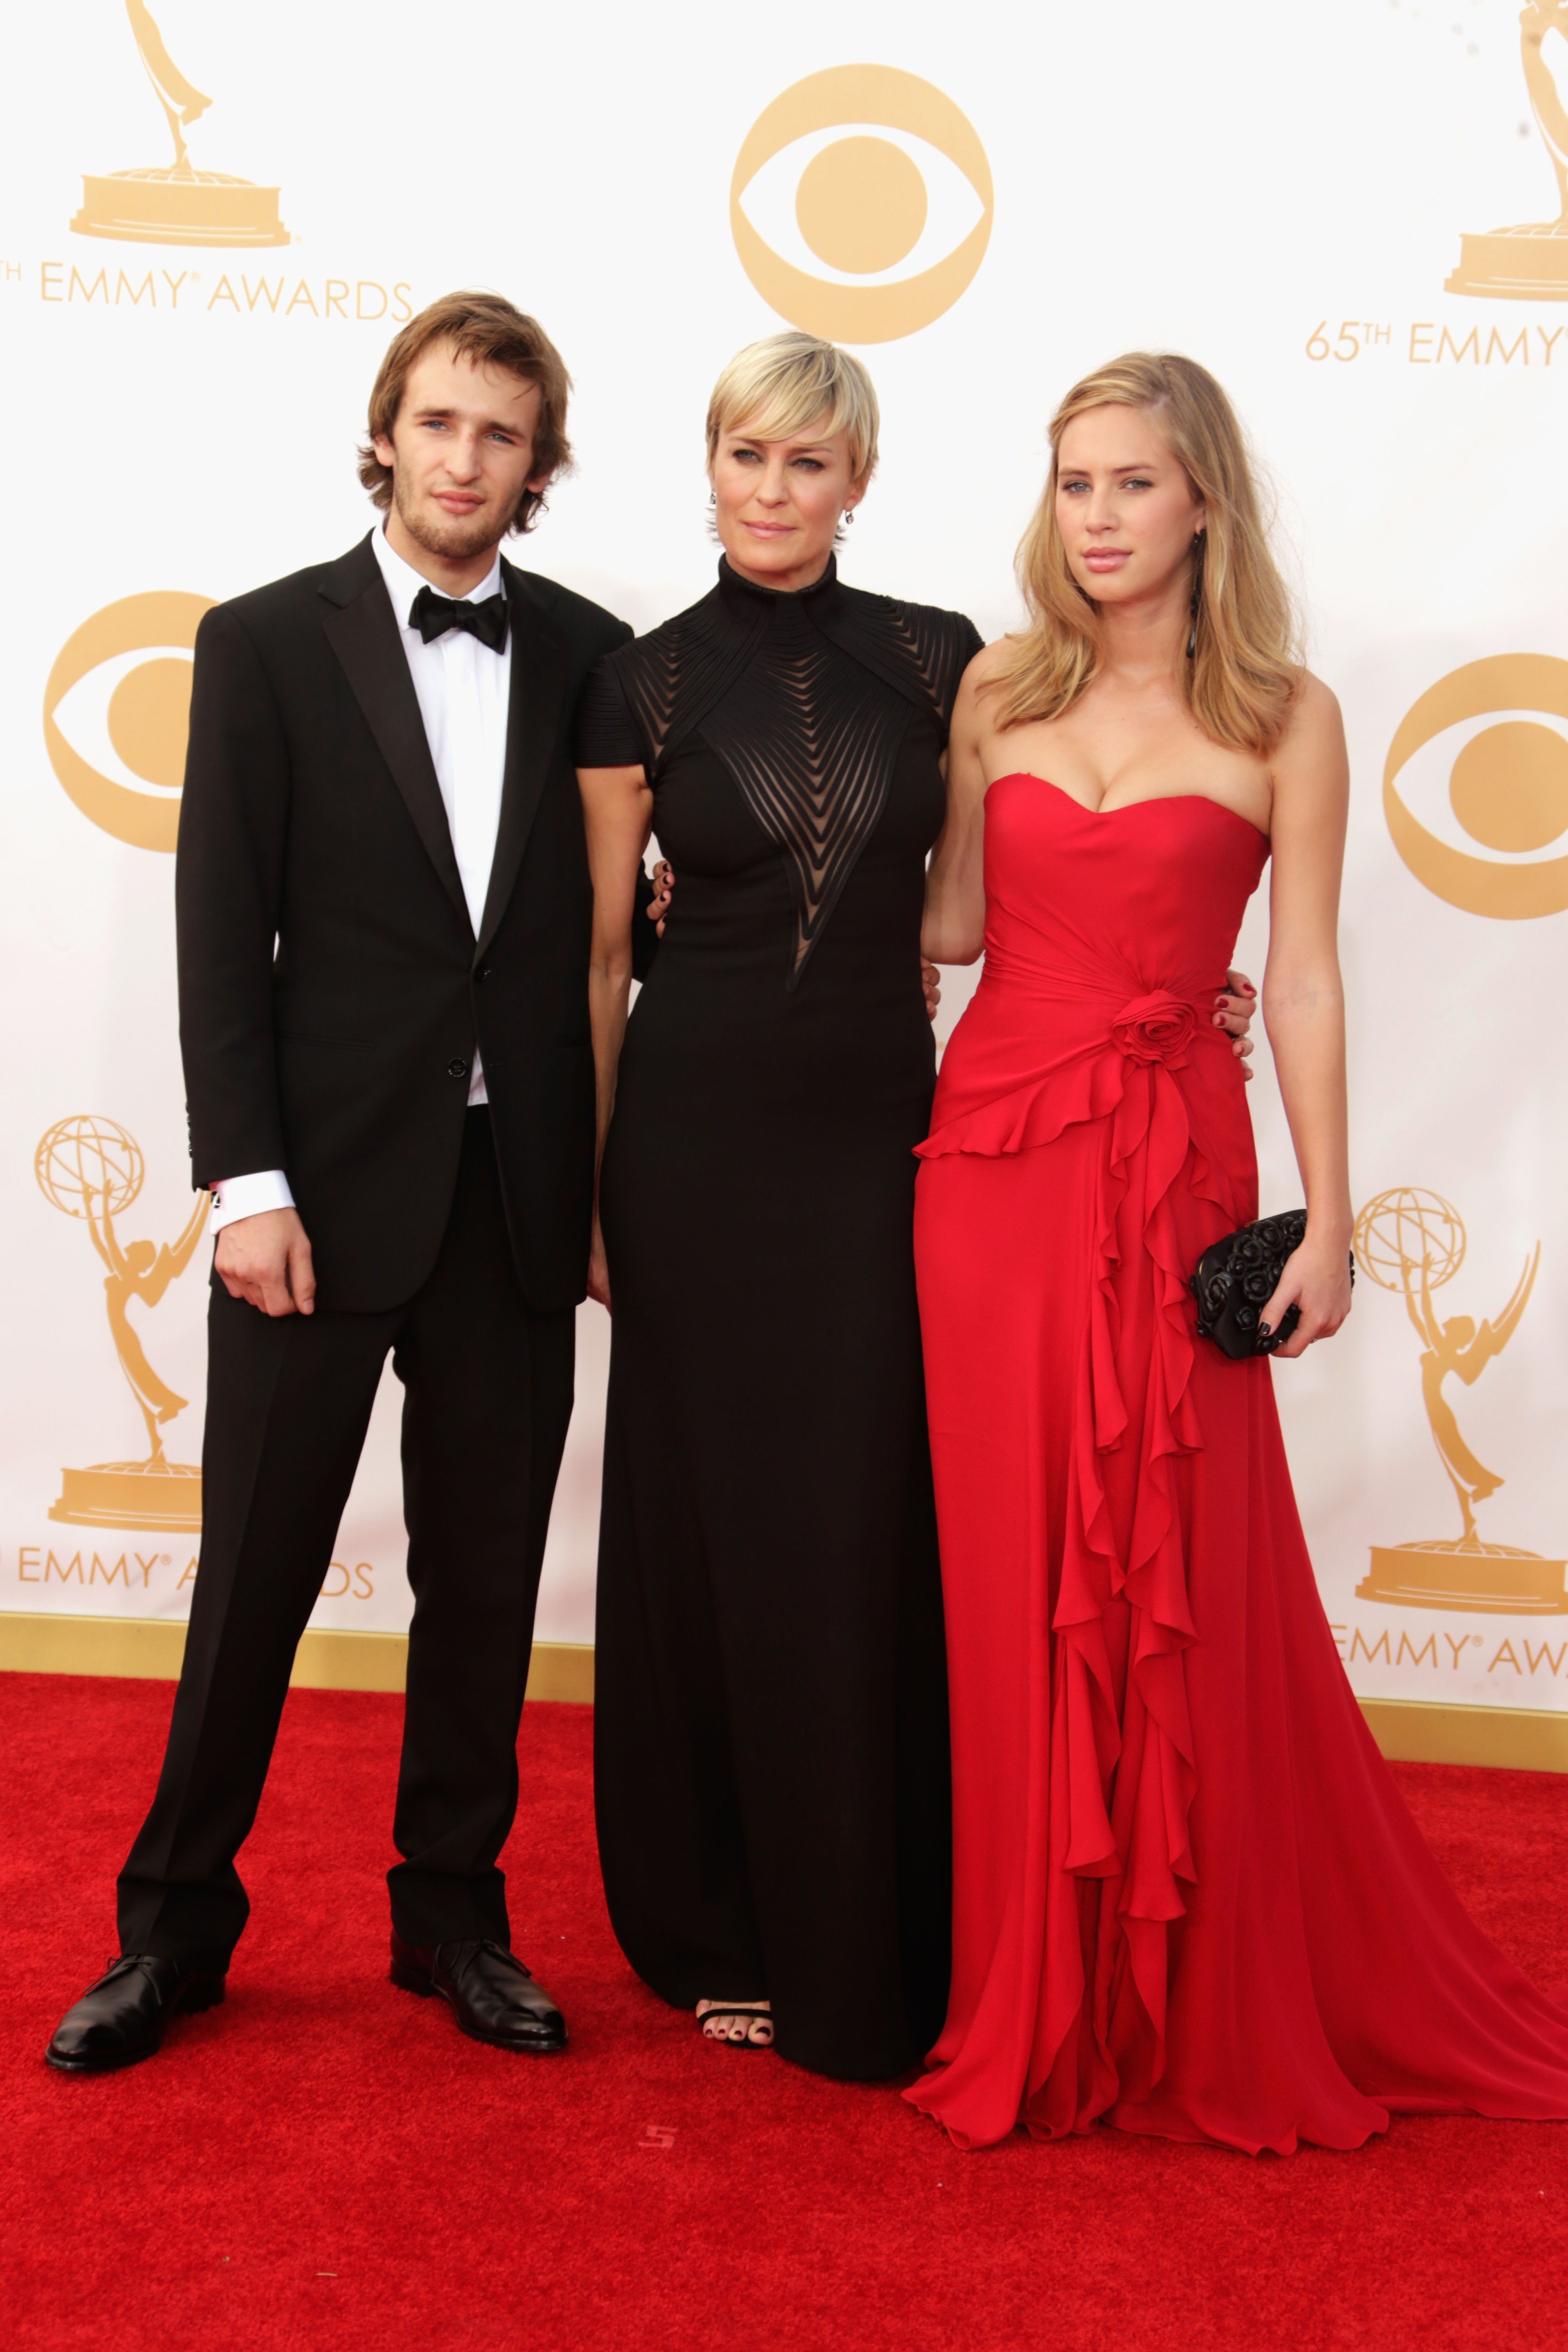 Robin Wright with her children Dylan Penn (L) and Hopper Penn (R) arriving at the 65th Annual Primetime Emmy Awards at Nokia Theatre L.A. Live on September 22, 2013 in Los Angeles, California ┃Source: Getty Images